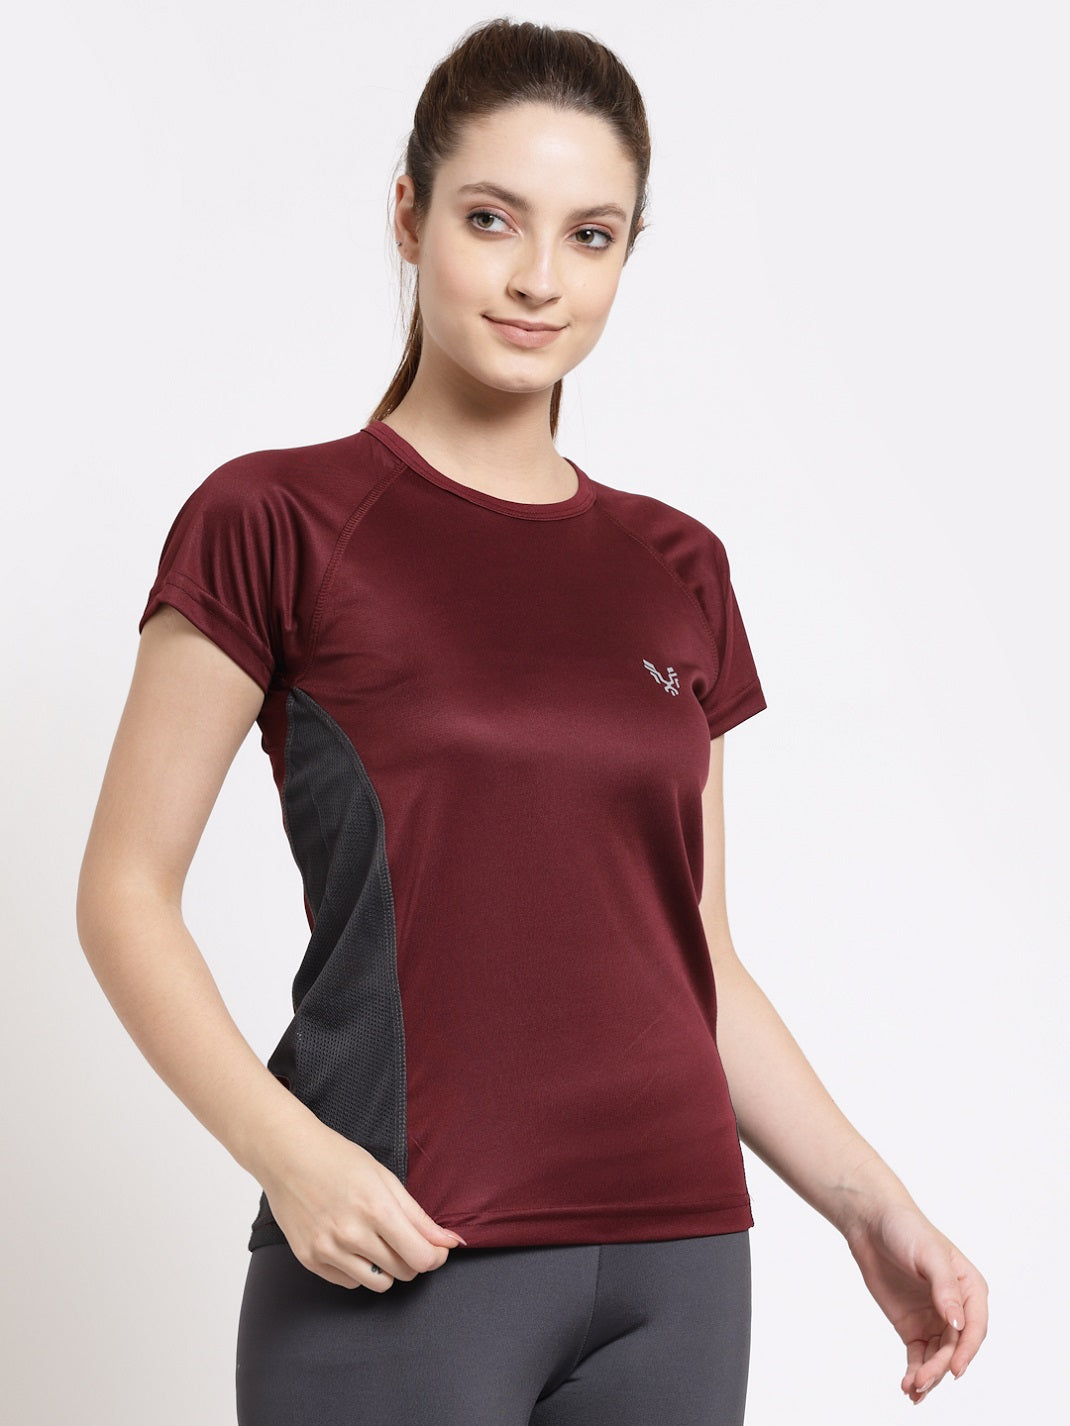 Fitkin Women Wine Coloured Training or Gym T-shirt With Design